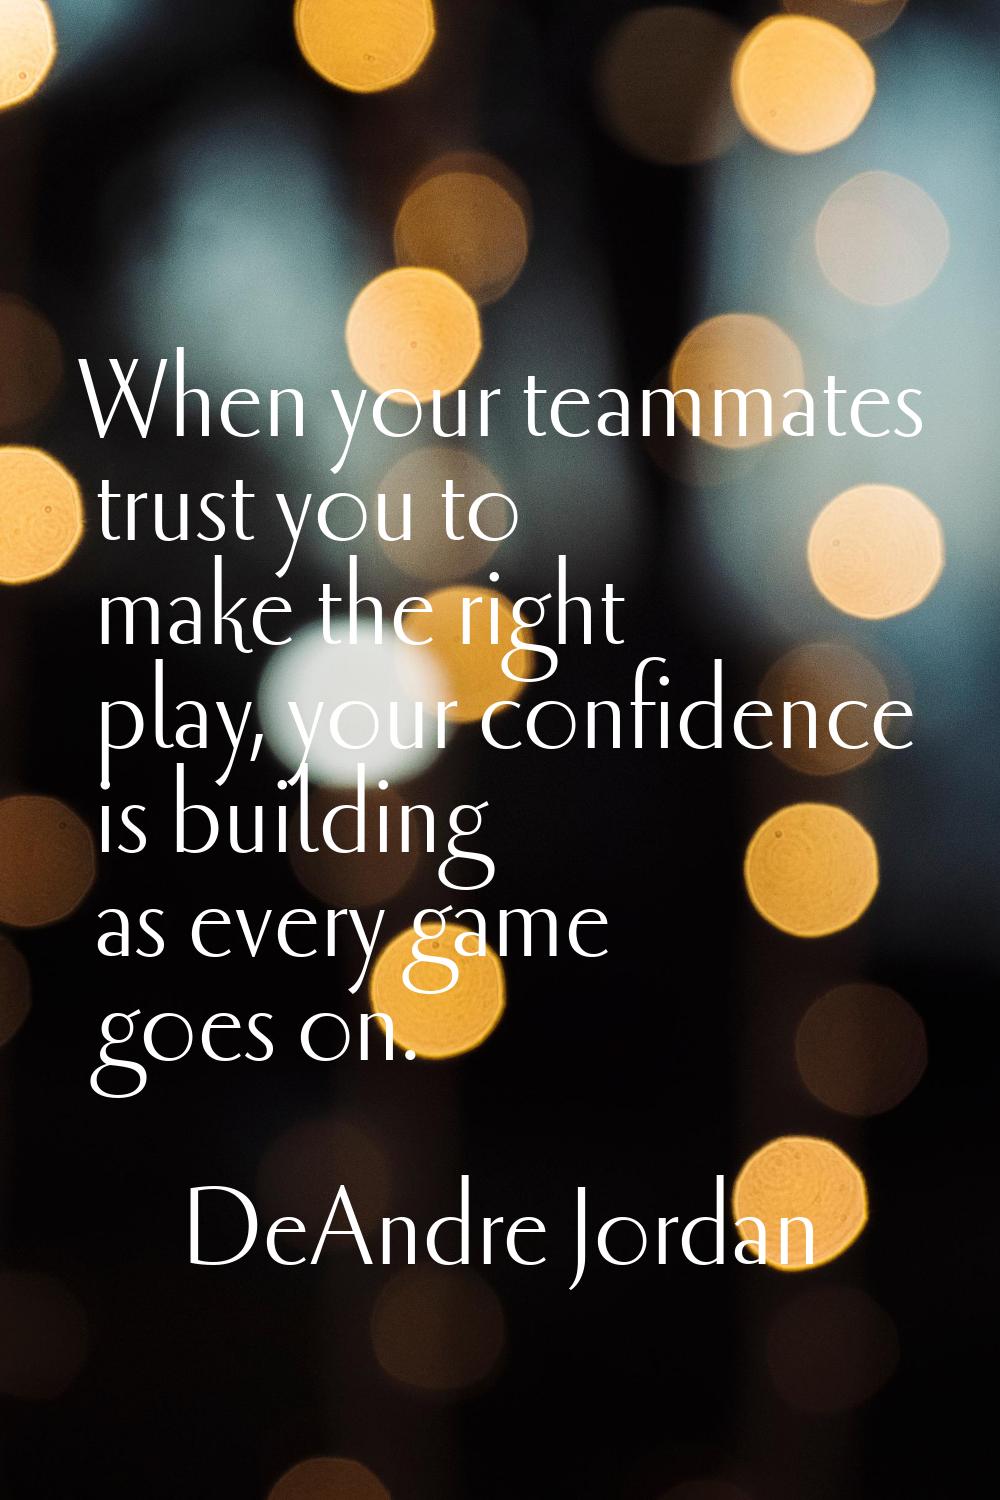 When your teammates trust you to make the right play, your confidence is building as every game goe